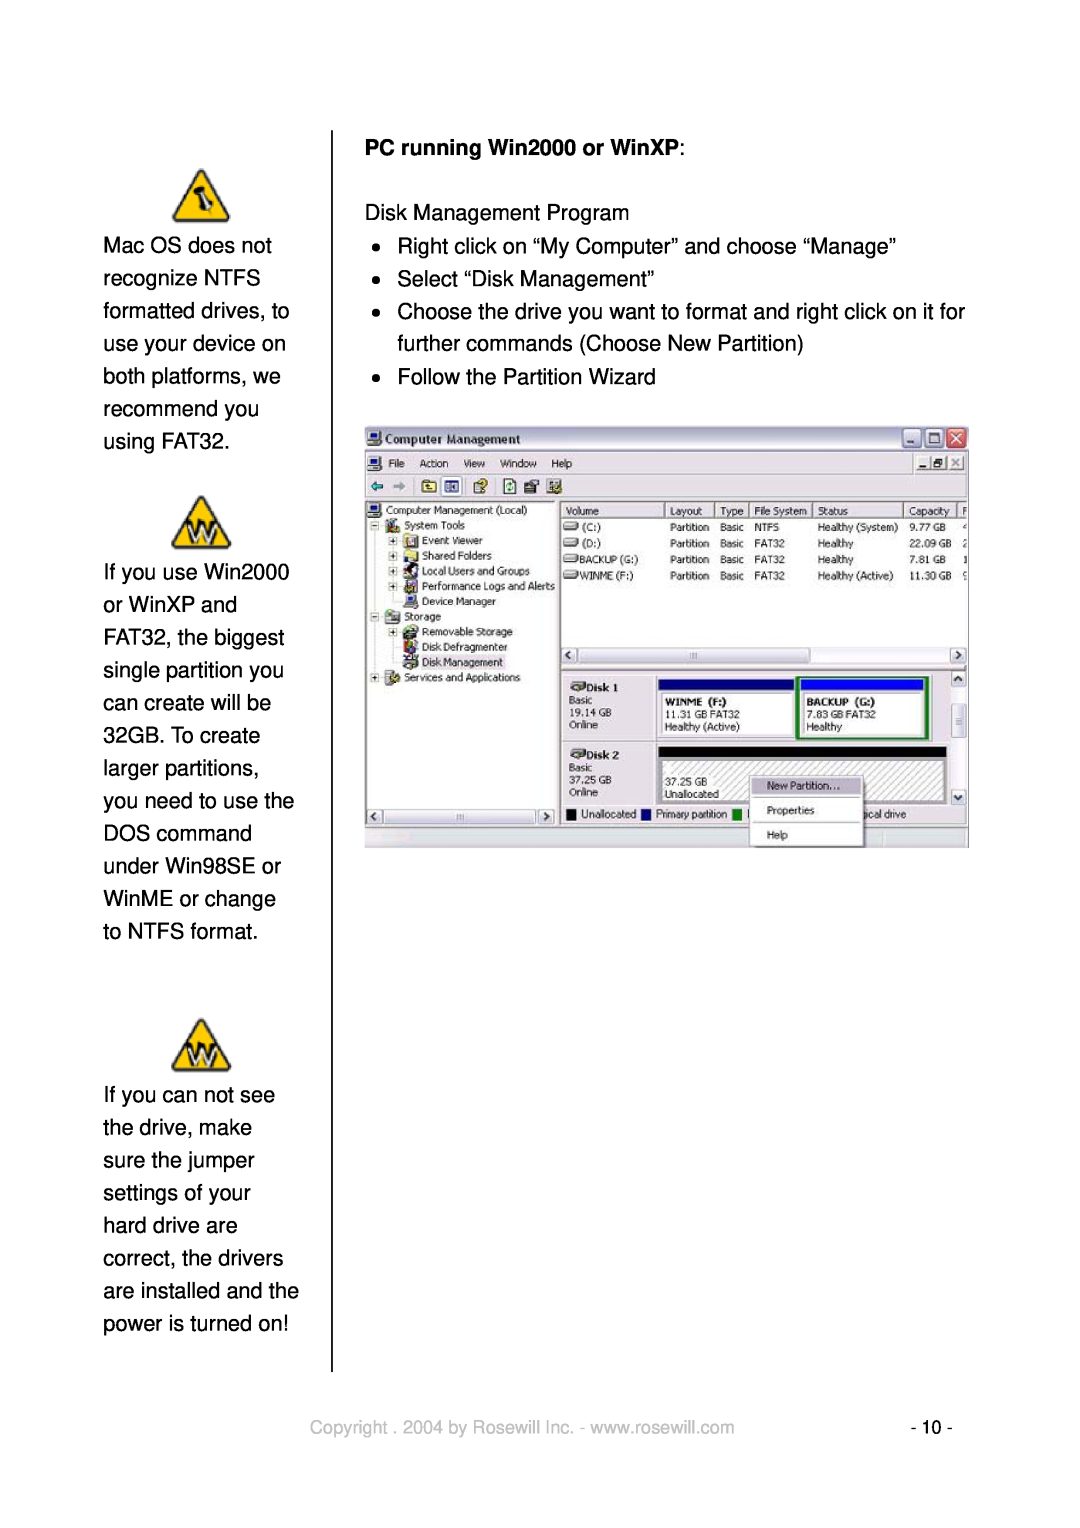 Rosewill RX30 manual PC running Win2000 or WinXP 